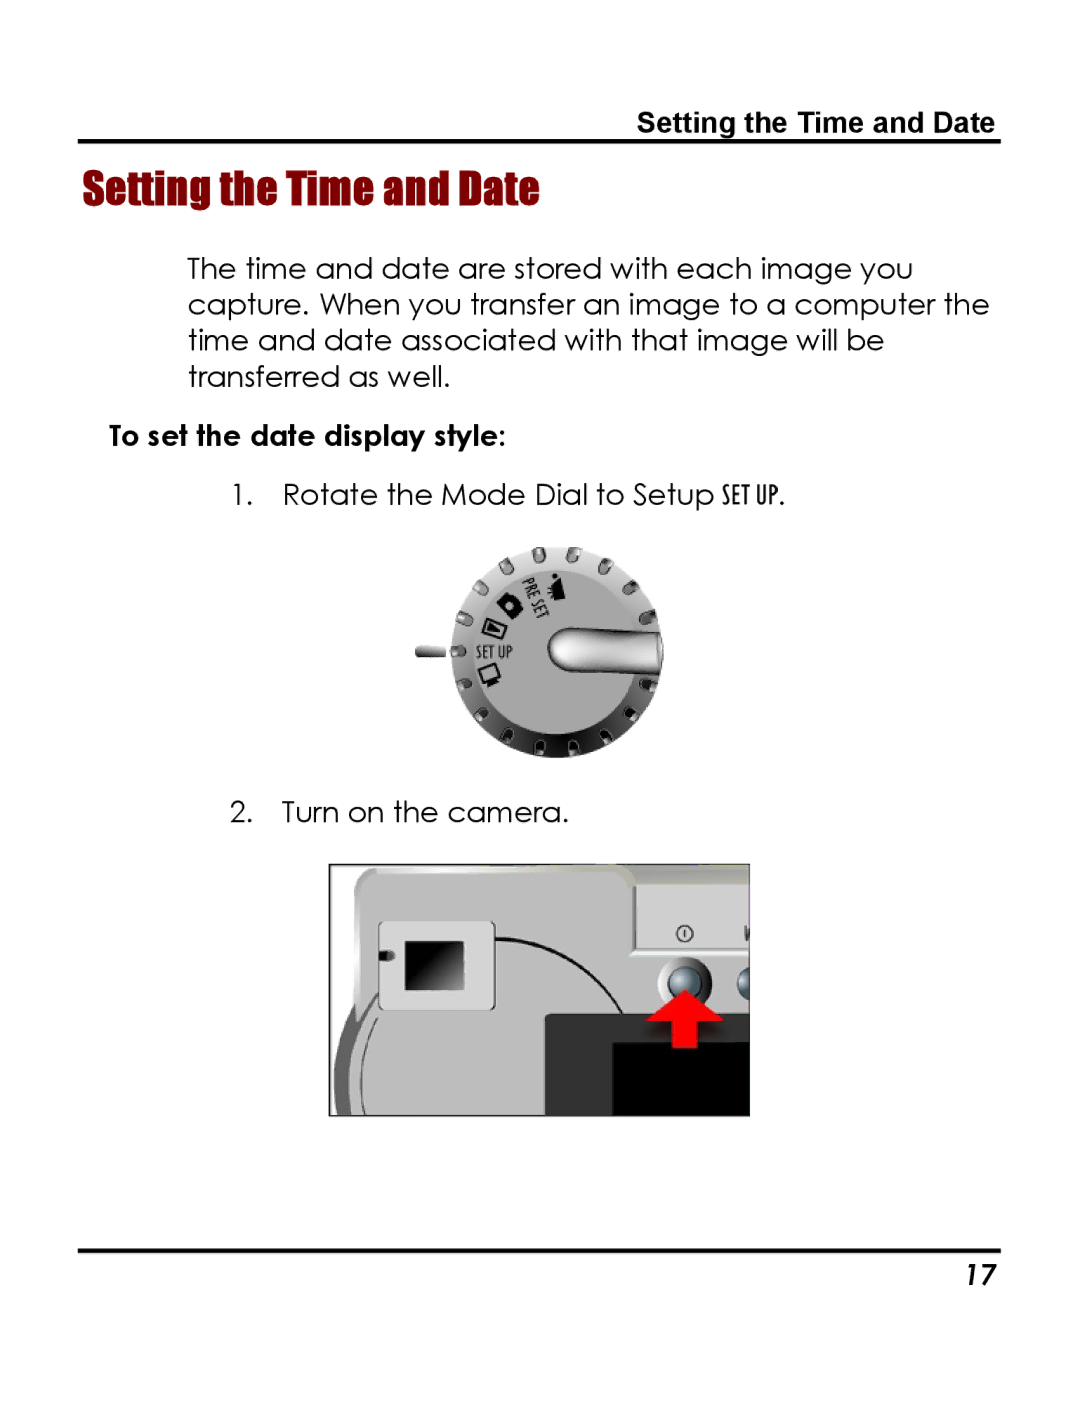 Vivitar 3765 instruction manual Setting the Time and Date, To set the date display style 